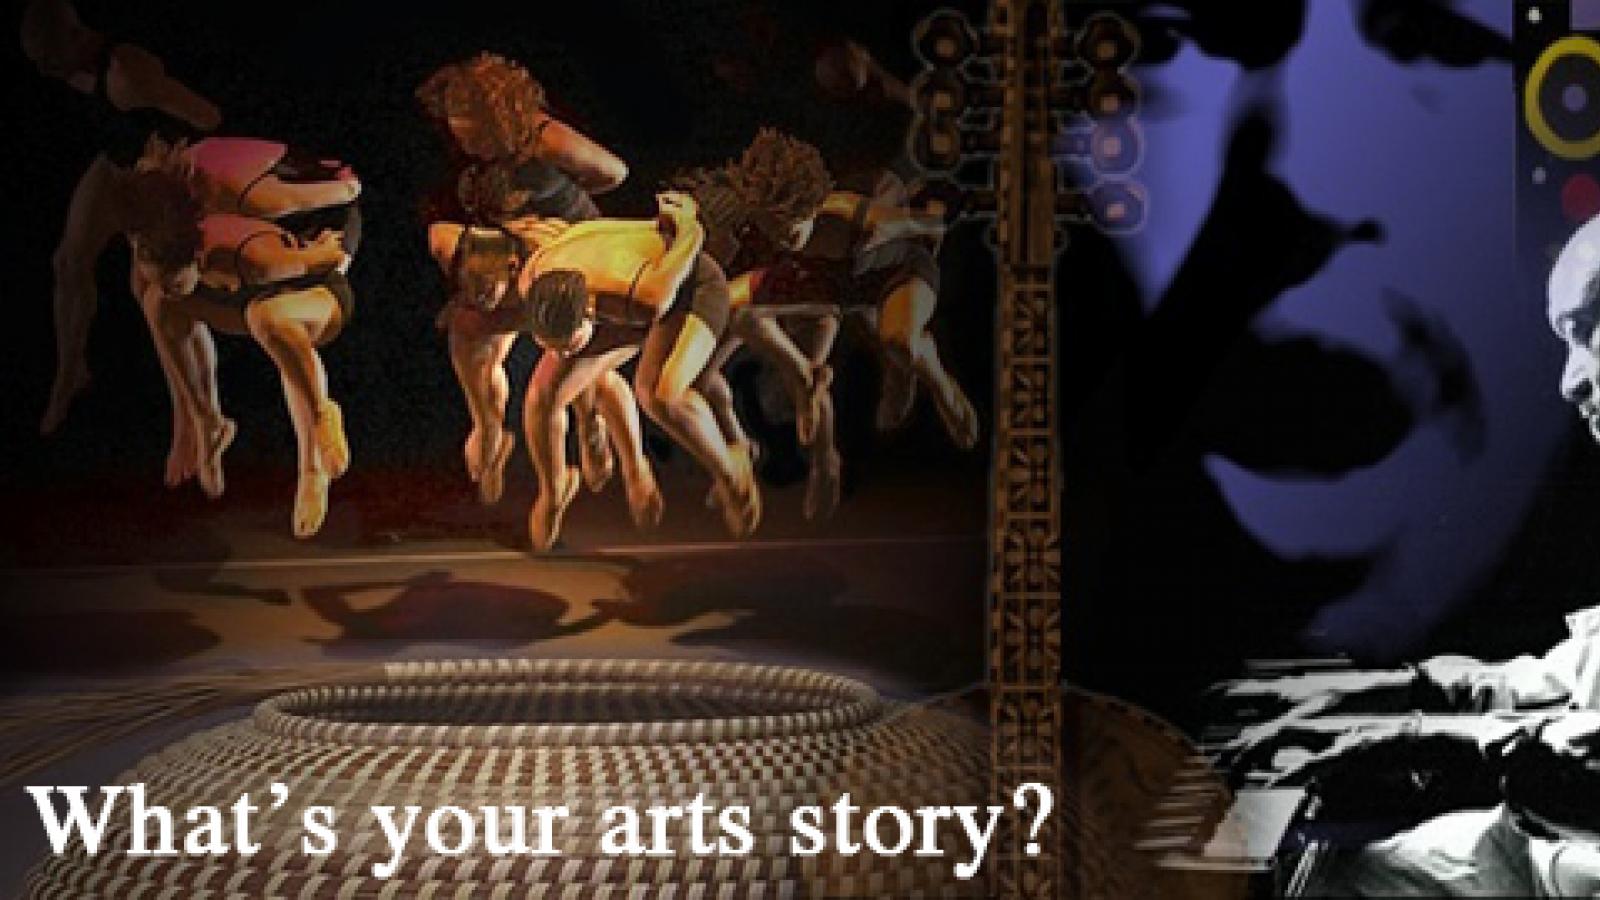 collage of a basket, a group of dancers, and a man at a piano with the text "What's your arts story?"